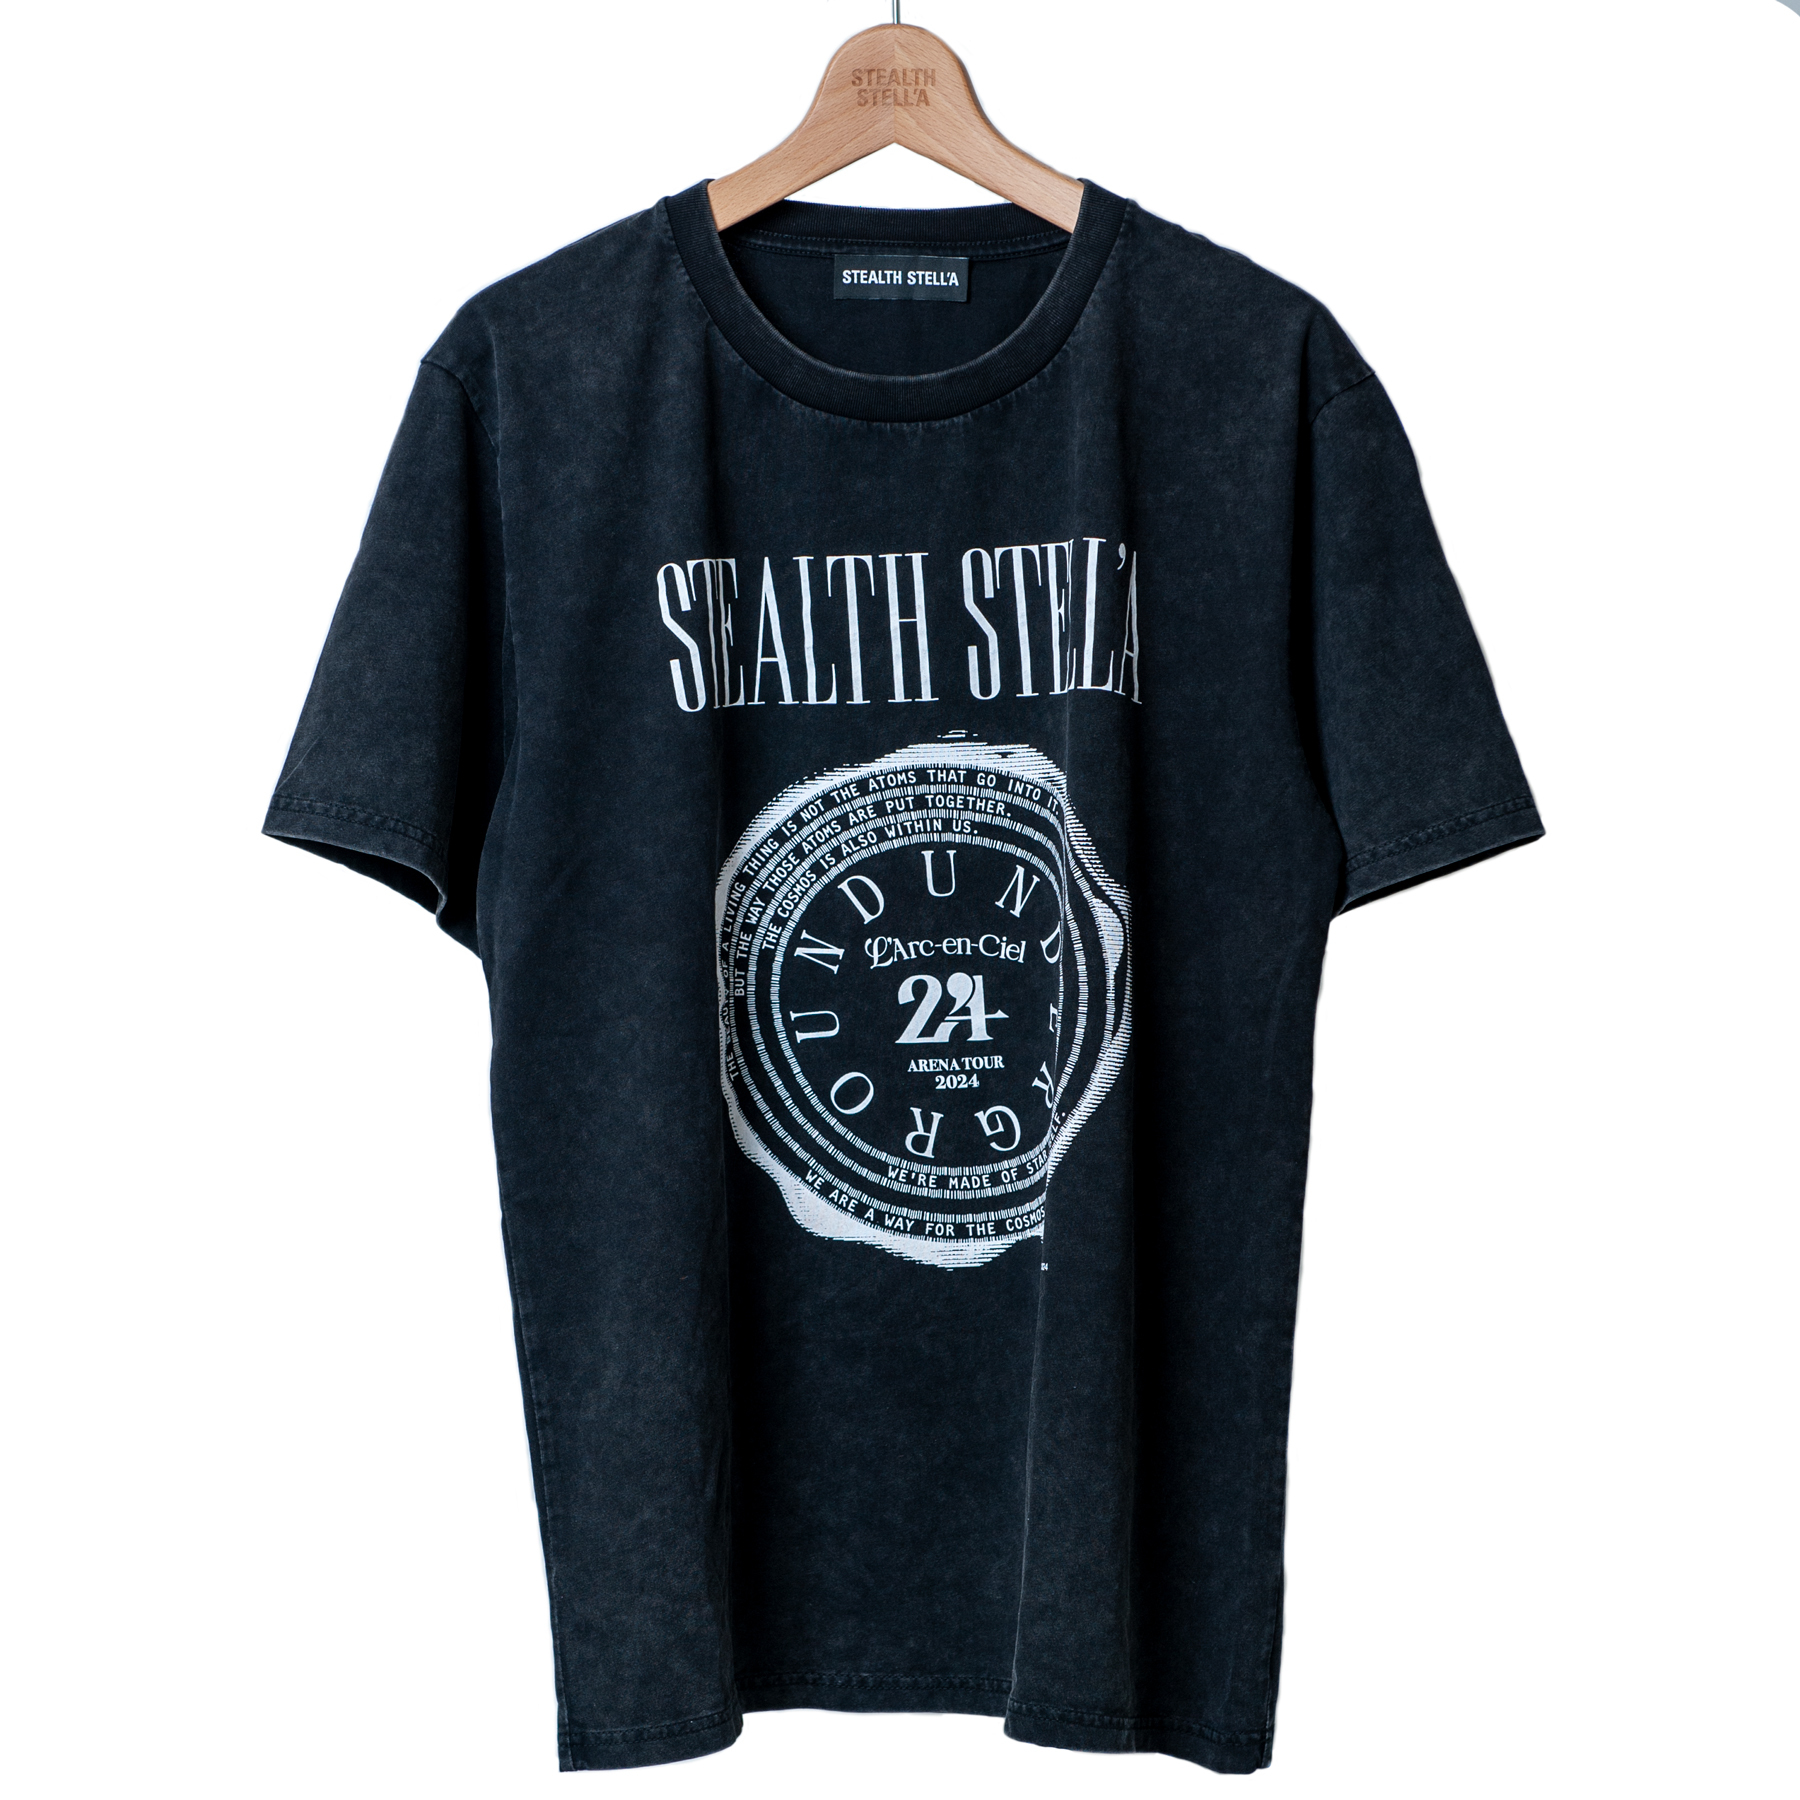 【STEALTH STELL'A】DISCOLORED（BLACK）